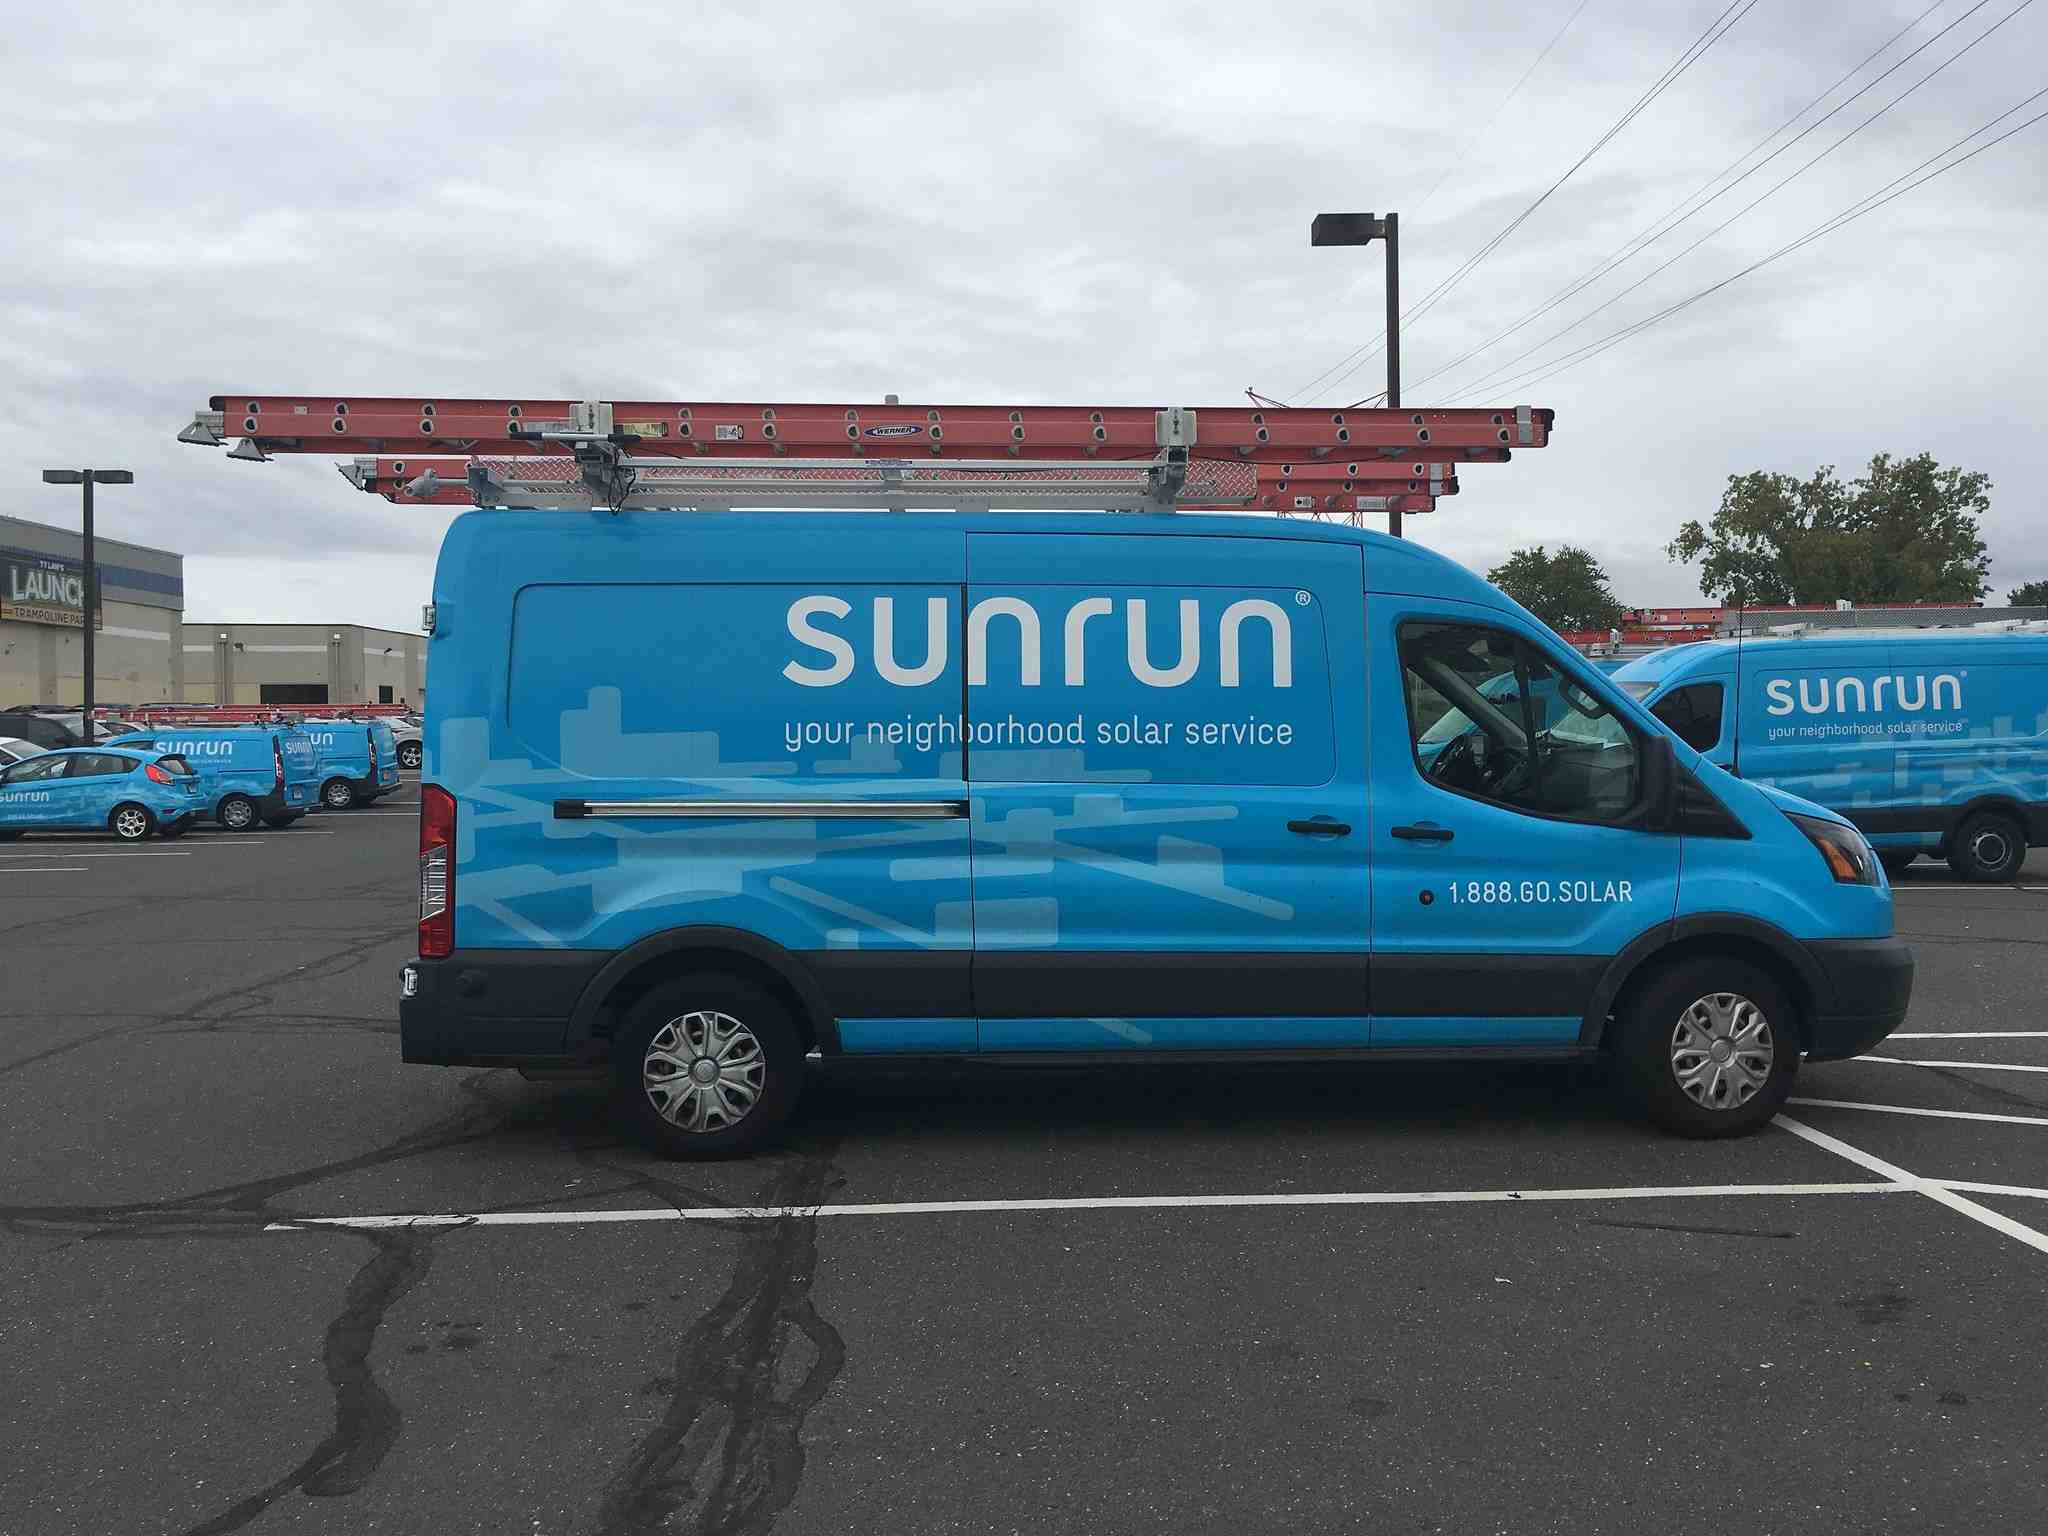 Is sunrun owned by Tesla?